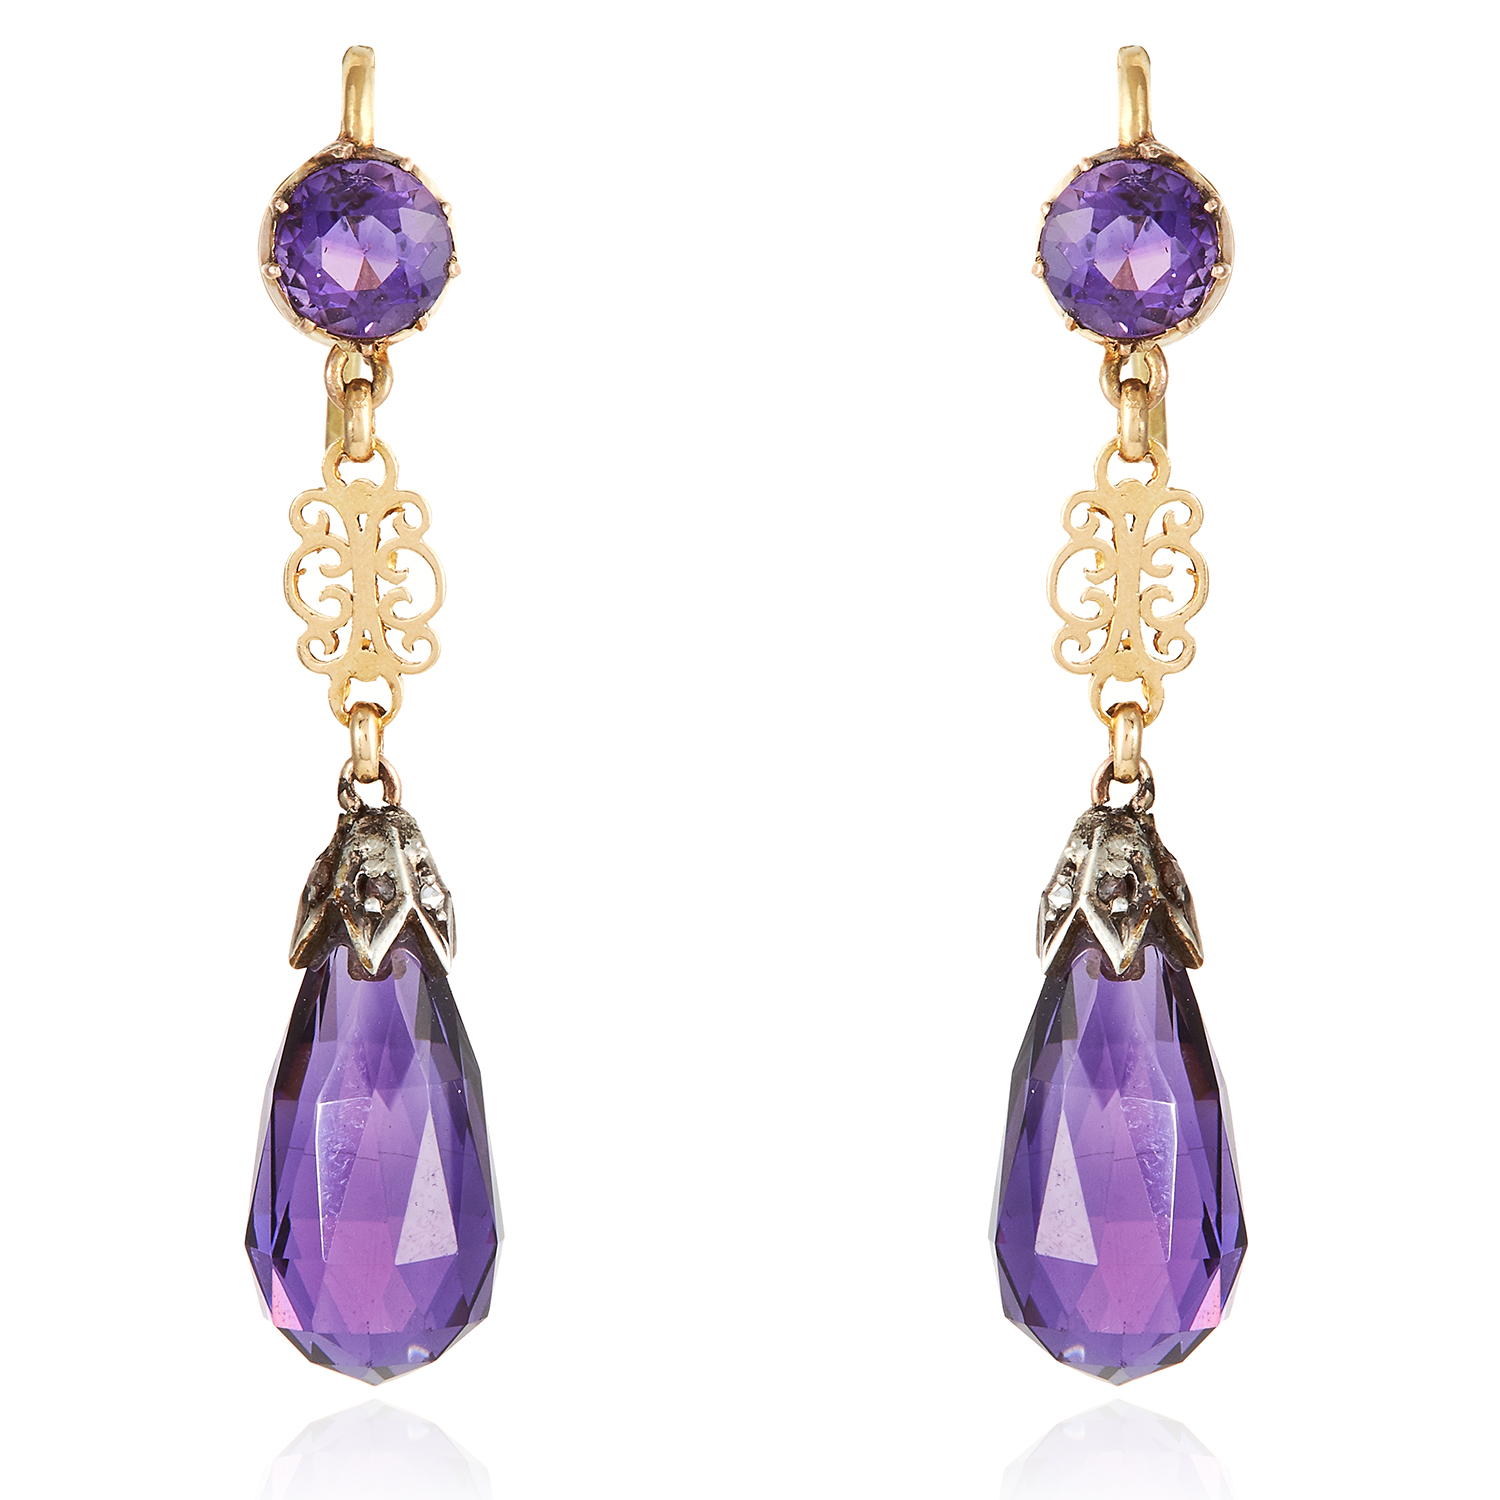 A PAIR OF ANTIQUE AMETHYST AND DIAMOND EARRINGS in yellow gold, the briolette amethysts accented